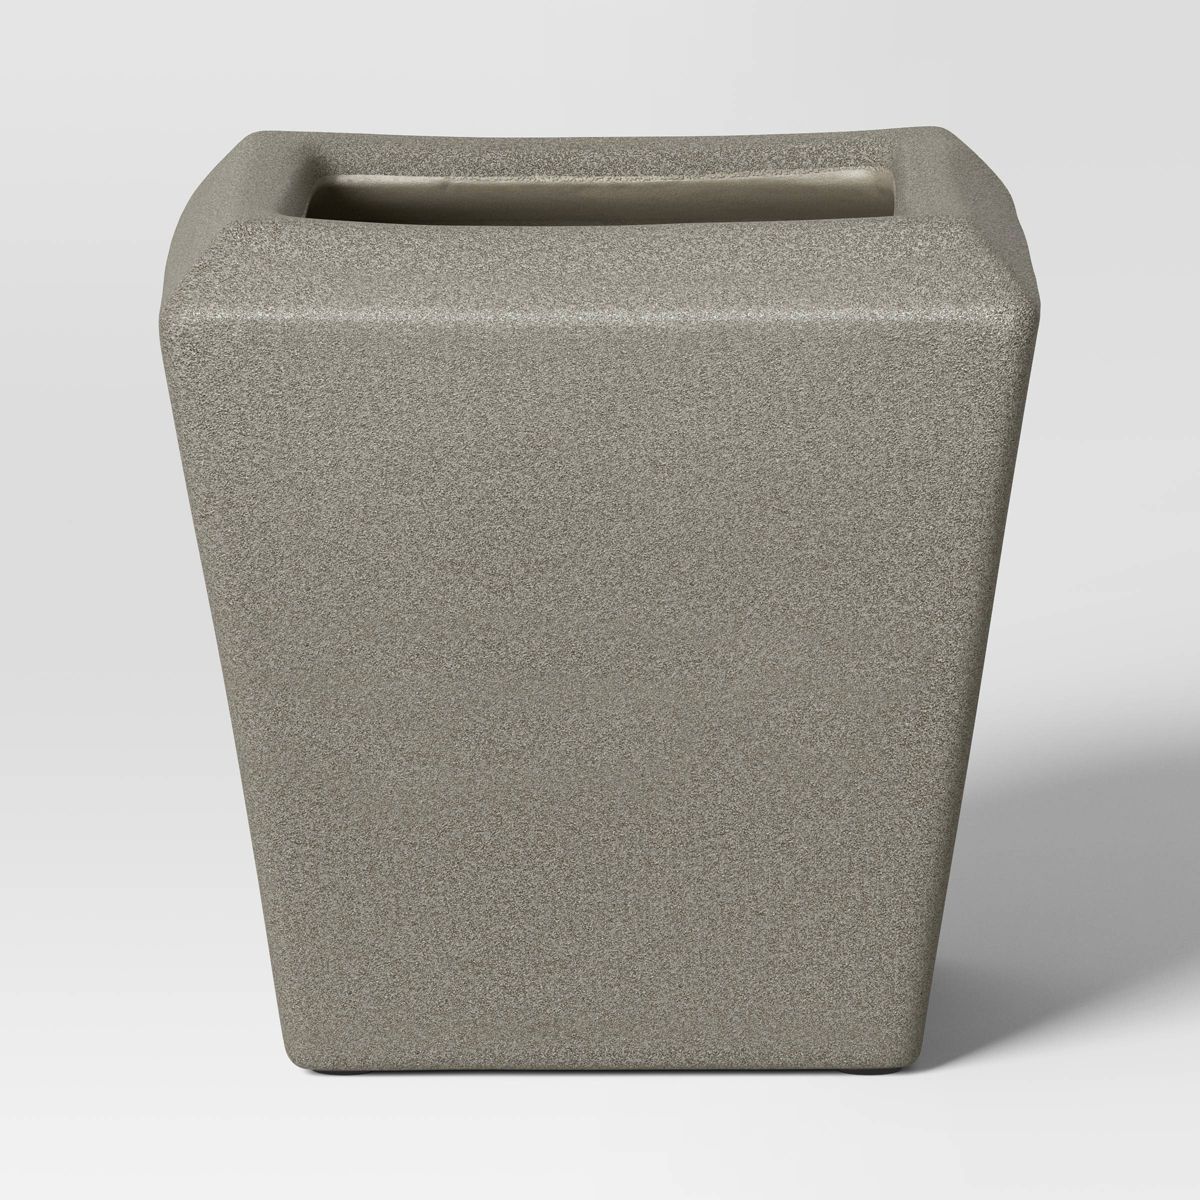 Square Ceramic Indoor Outdoor Planter Pot Charcoal Gray - Threshold™ designed with Studio McGee | Target